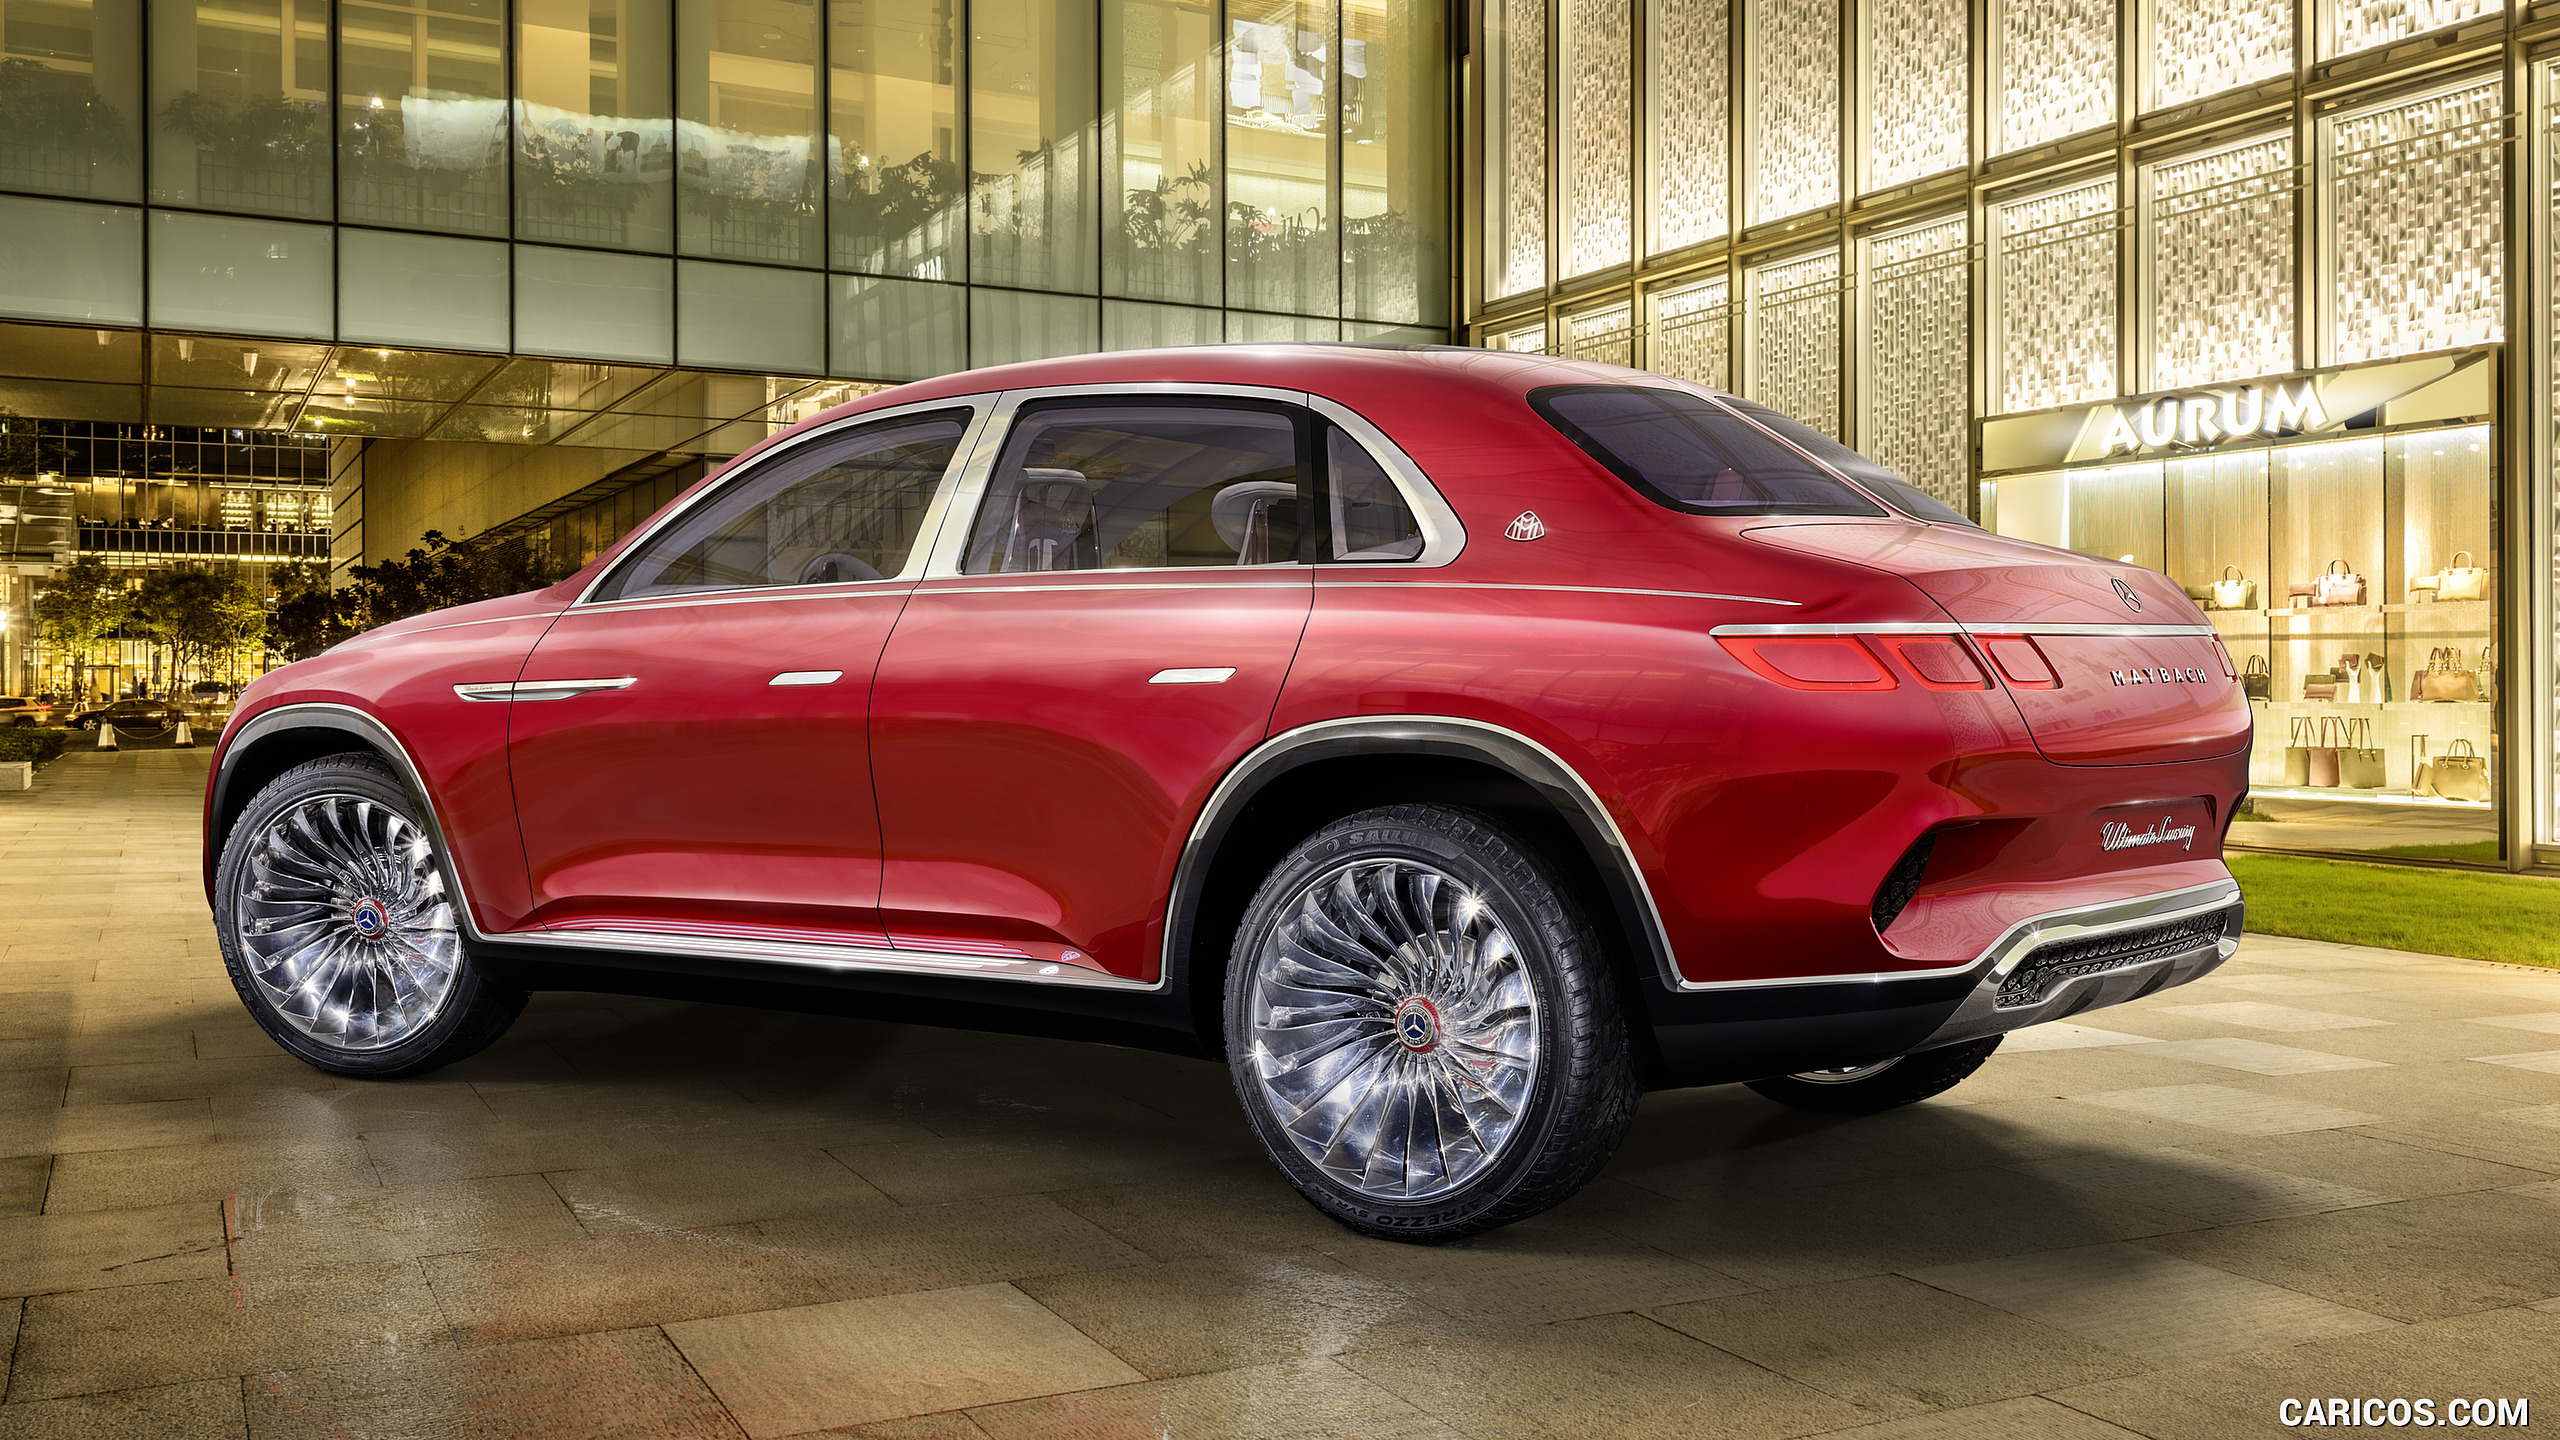 2018 Mercedes-Maybach Vision Ultimate Luxury SUV Concept - Rear Three-Quarter, #5 of 41